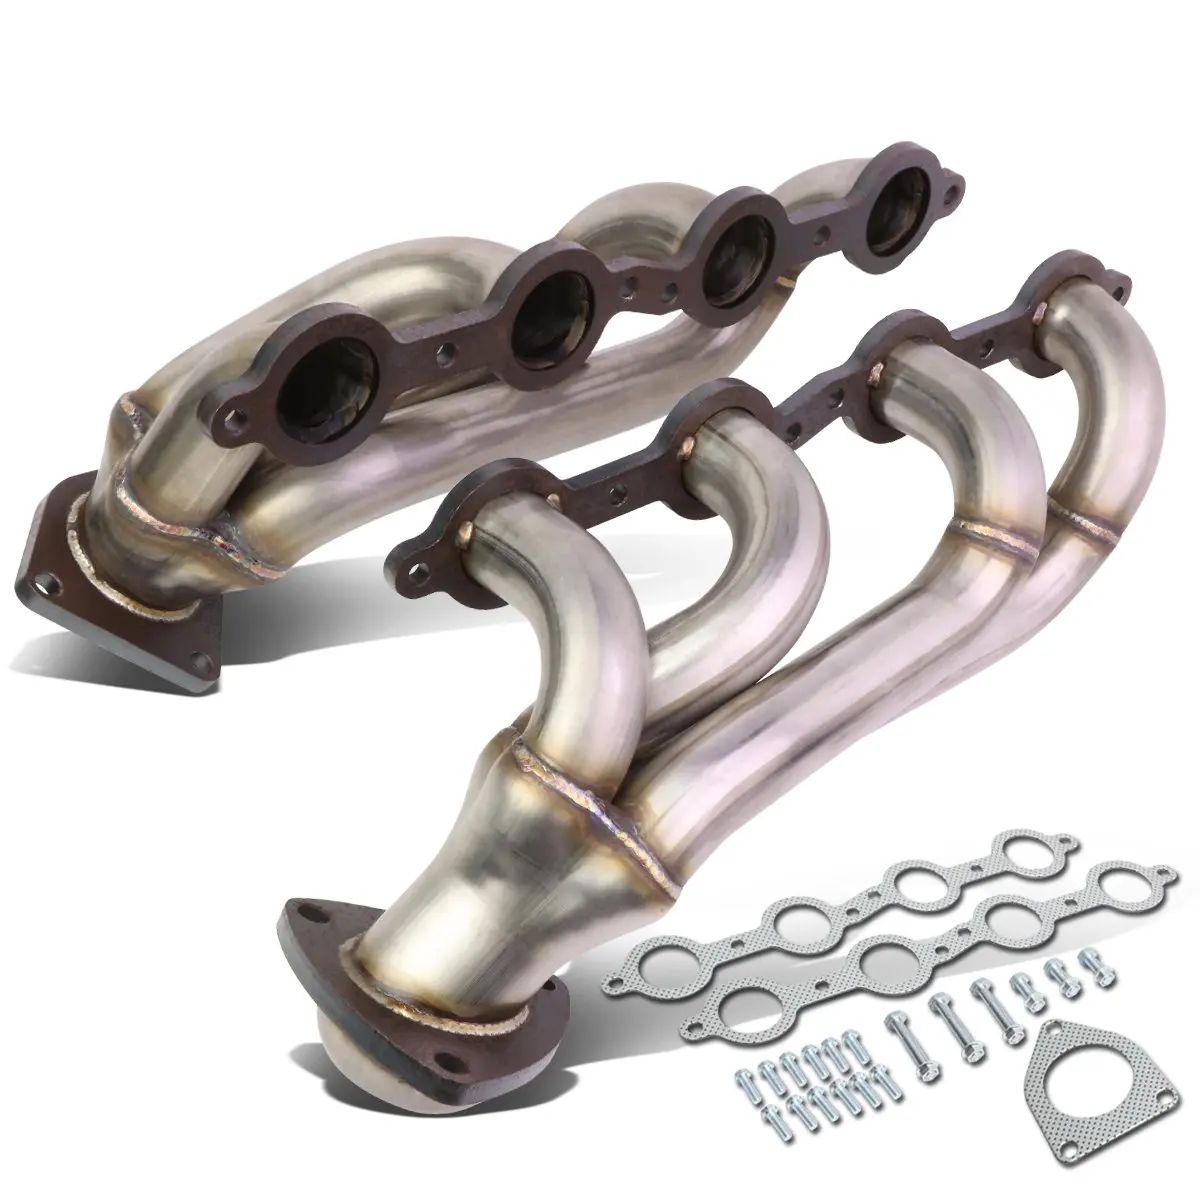 Cheap Gmc Exhaust, find Gmc Exhaust deals on line at Alibaba.com